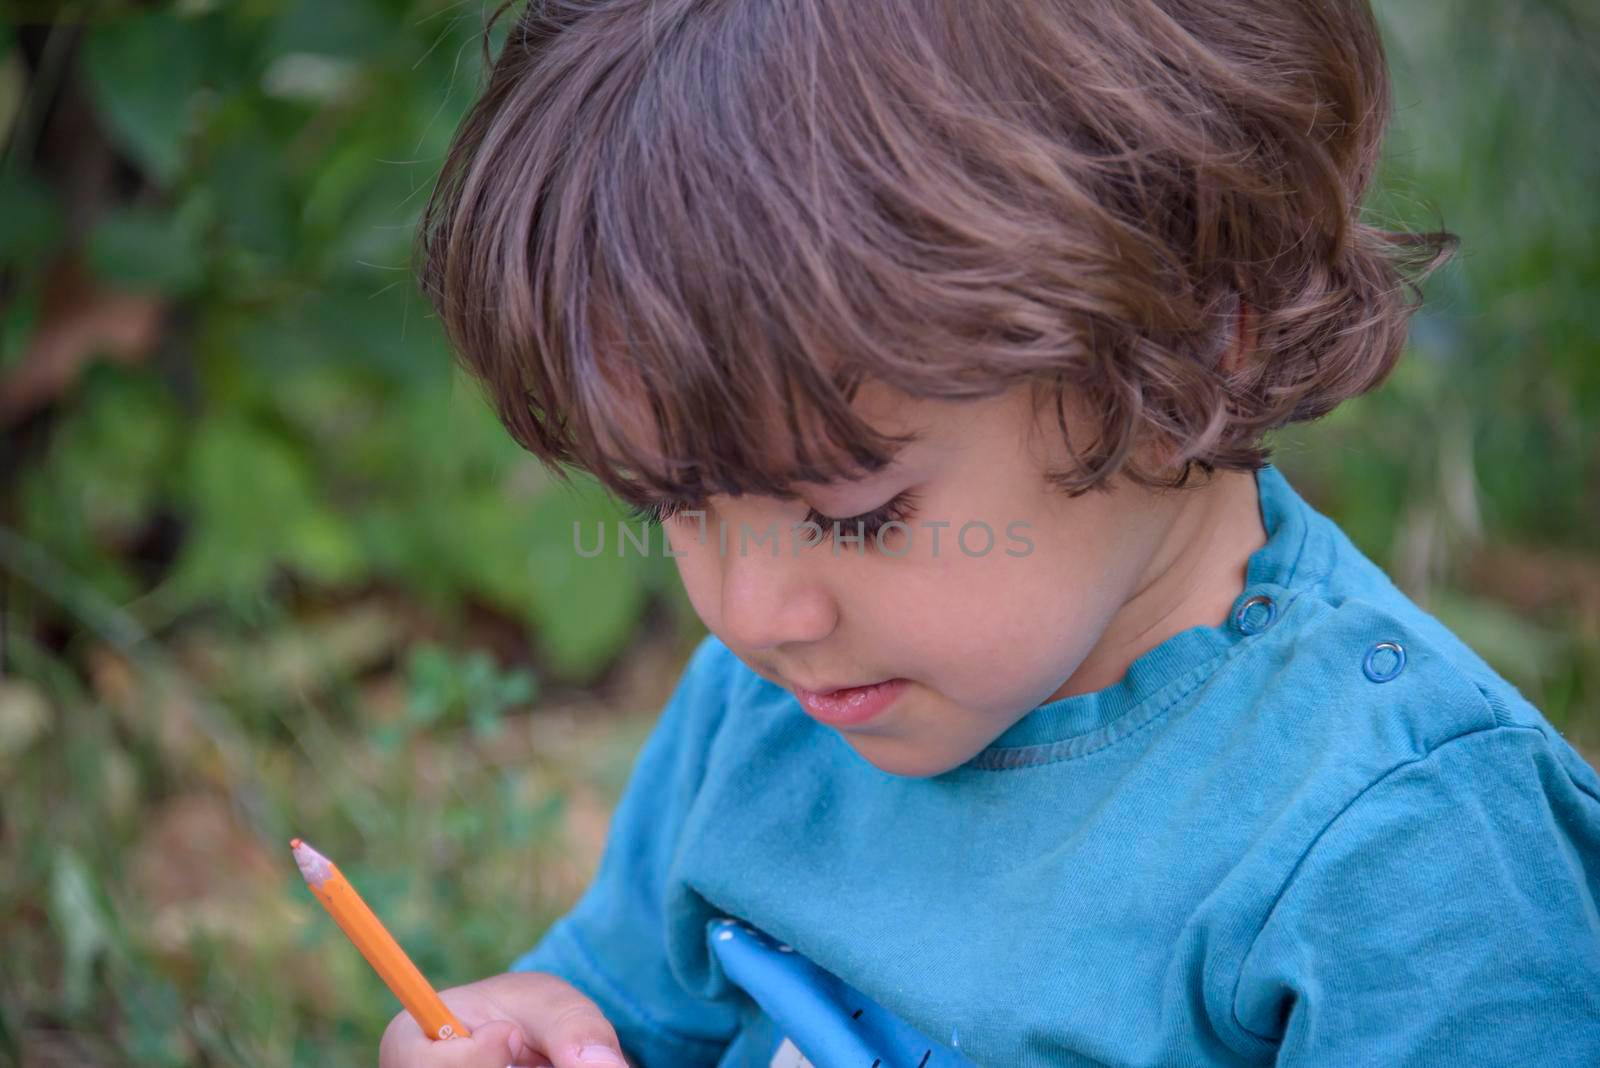 Elementary school age boys love to paint in parks. Boys are drawing pictures as an outdoor hobby. Concept of education outside of school